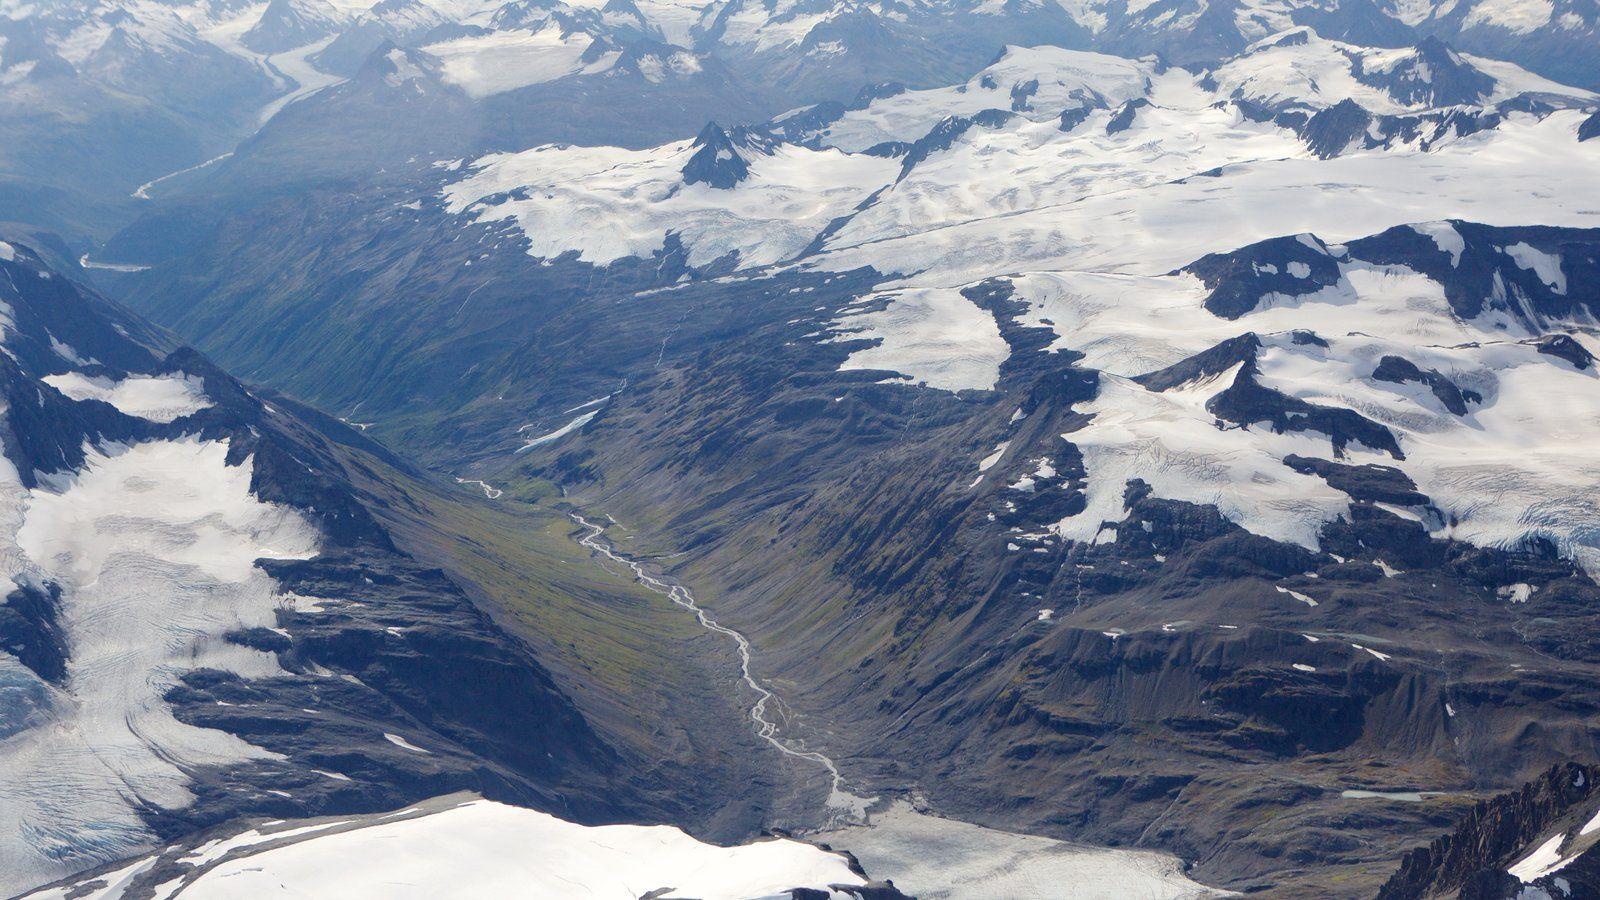 Mountain Picture: View Image Of Wrangell St. Elias National Park